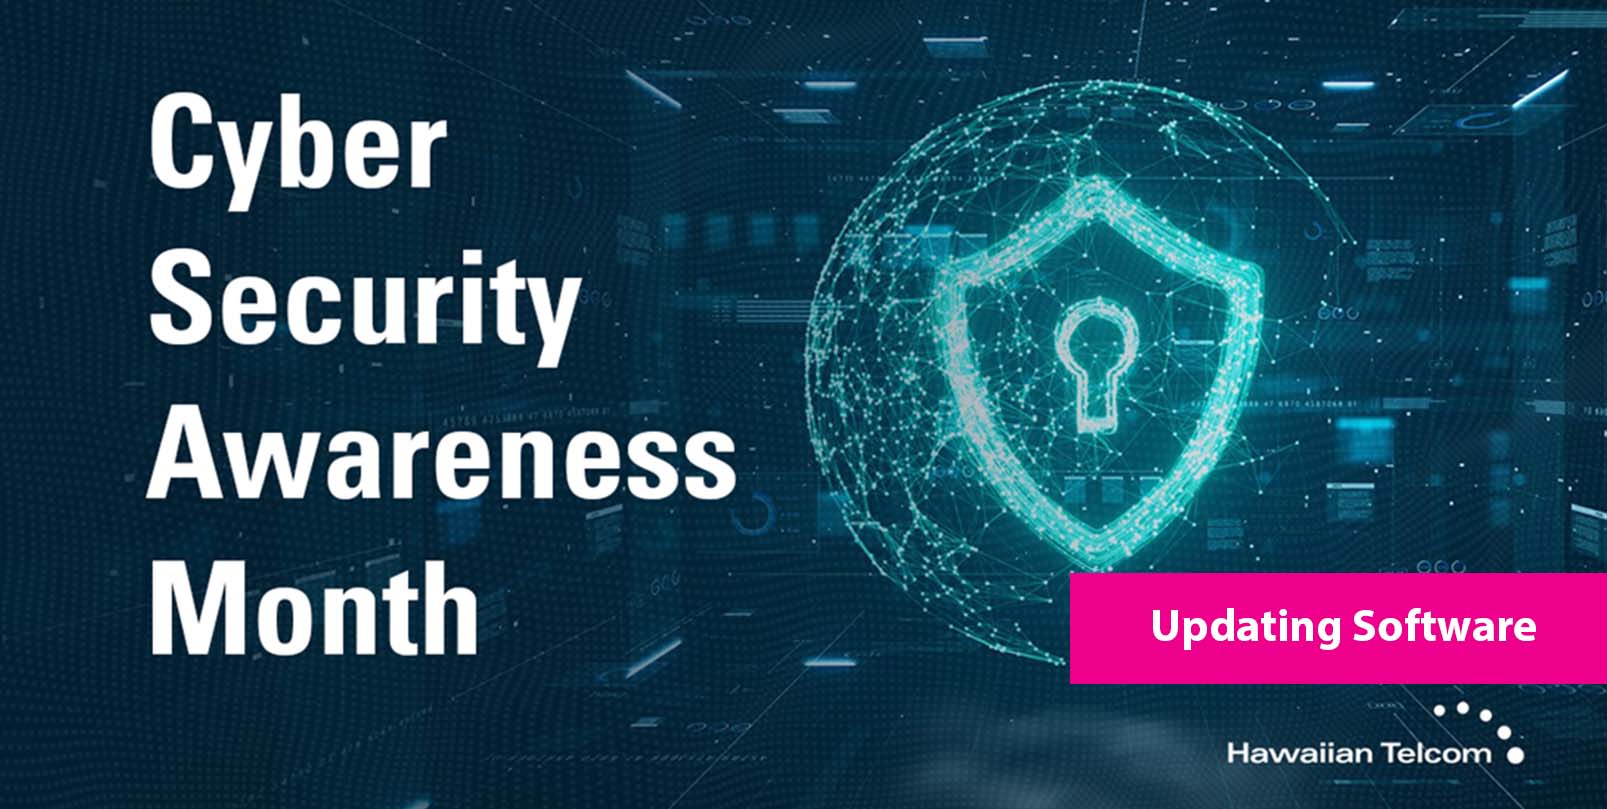 Cybersecurity awareness month, updating software, blue security shield image on navy blue background